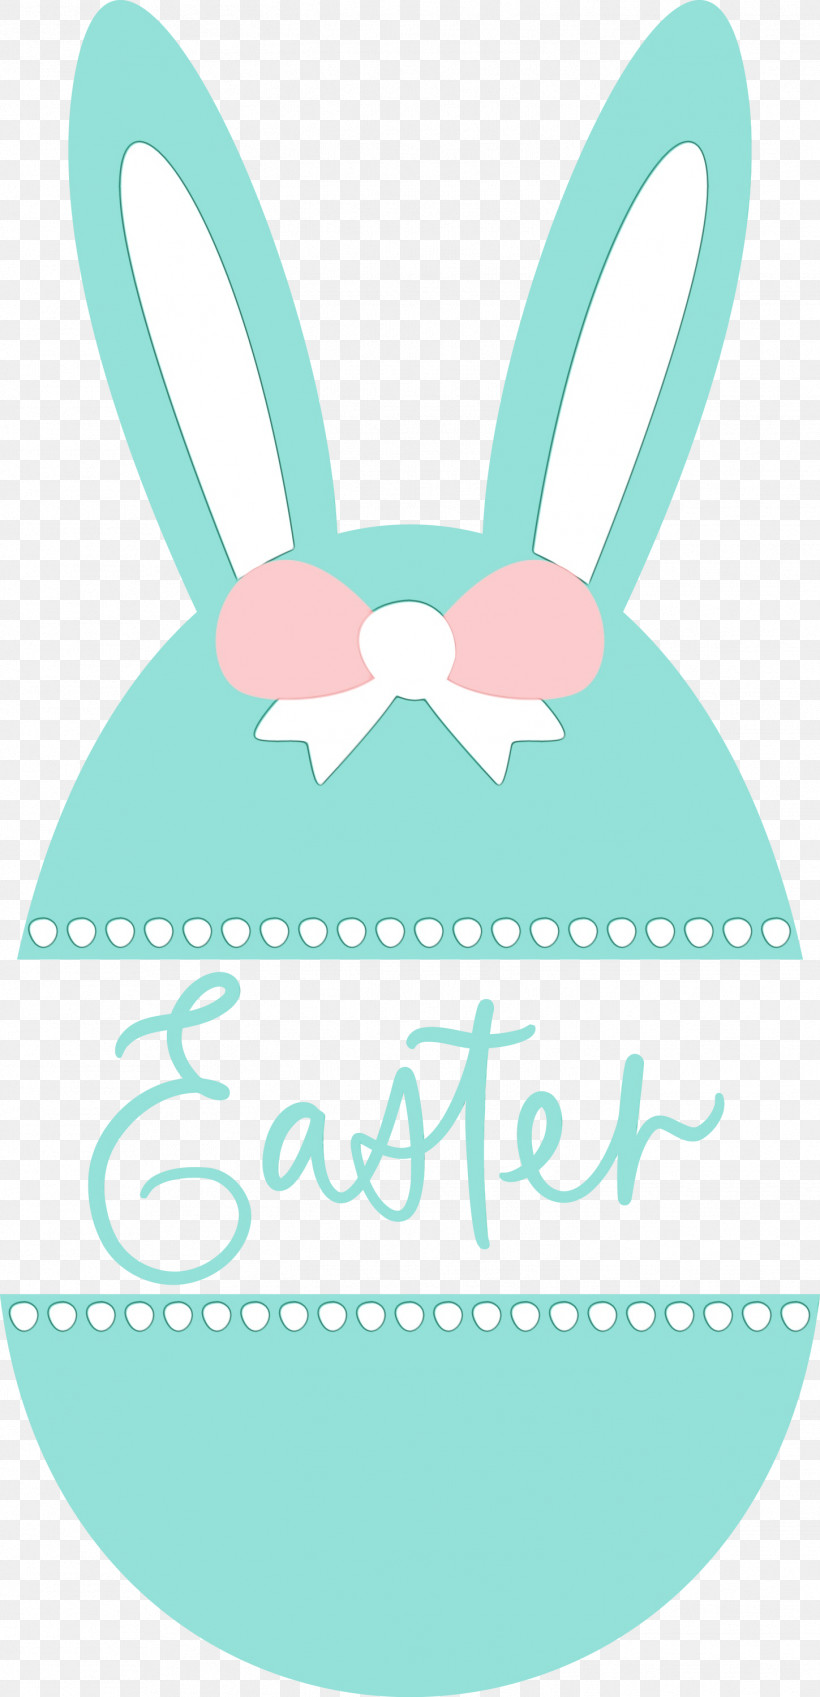 Aqua Turquoise Teal Green Turquoise, PNG, 1449x3000px, Easter Day, Aqua, Green, Happy Easter Day, Paint Download Free